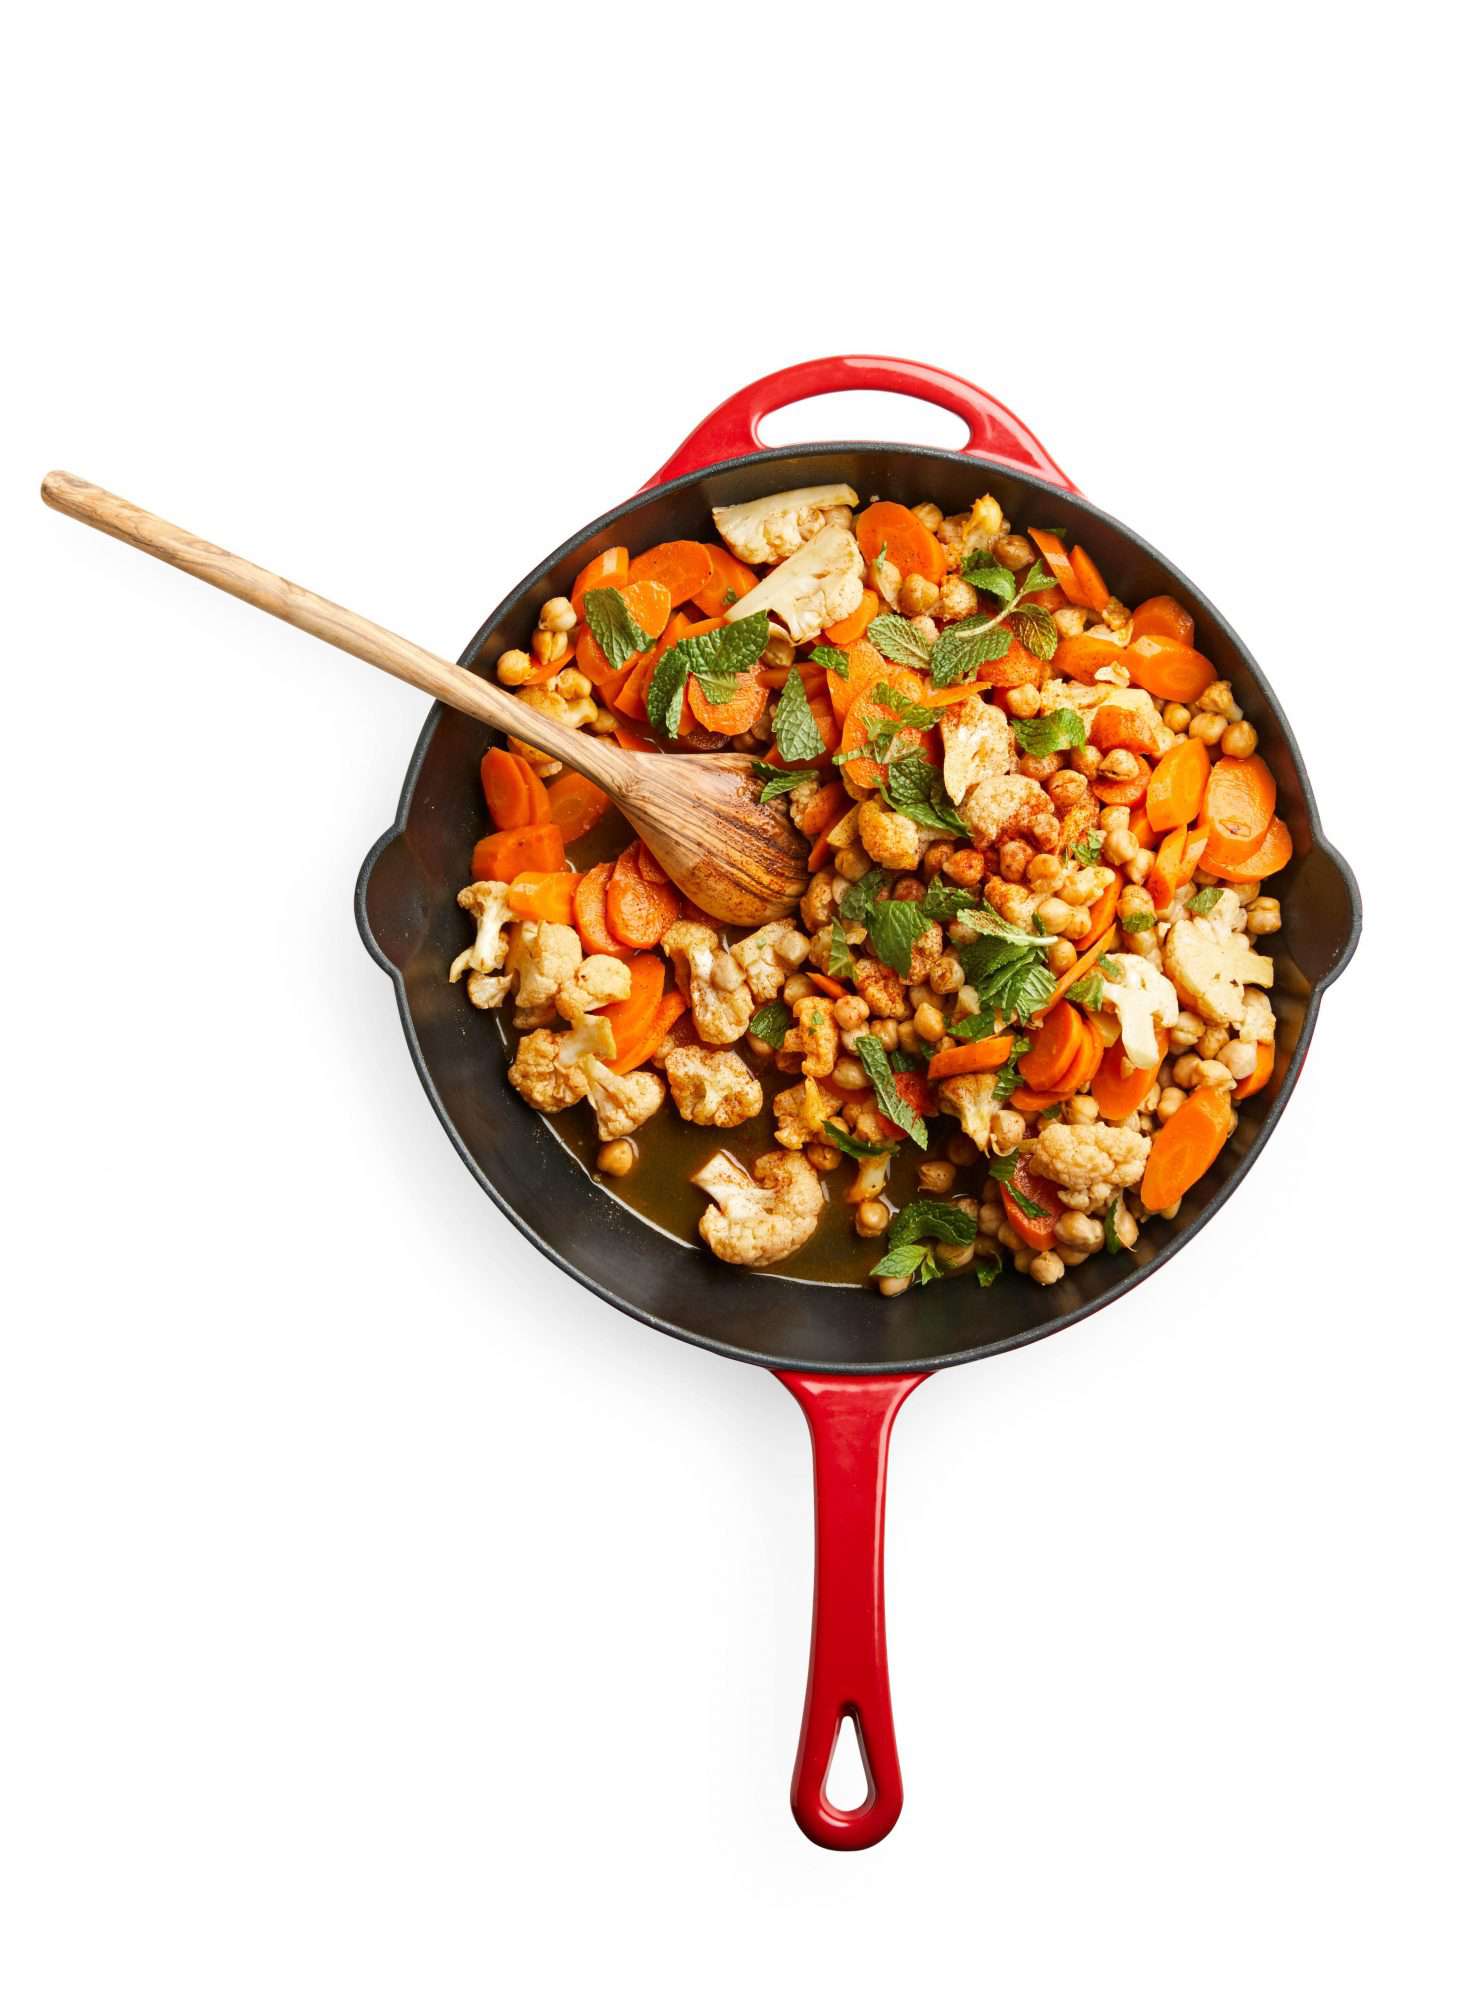 Carrot and Chickpea Skillet